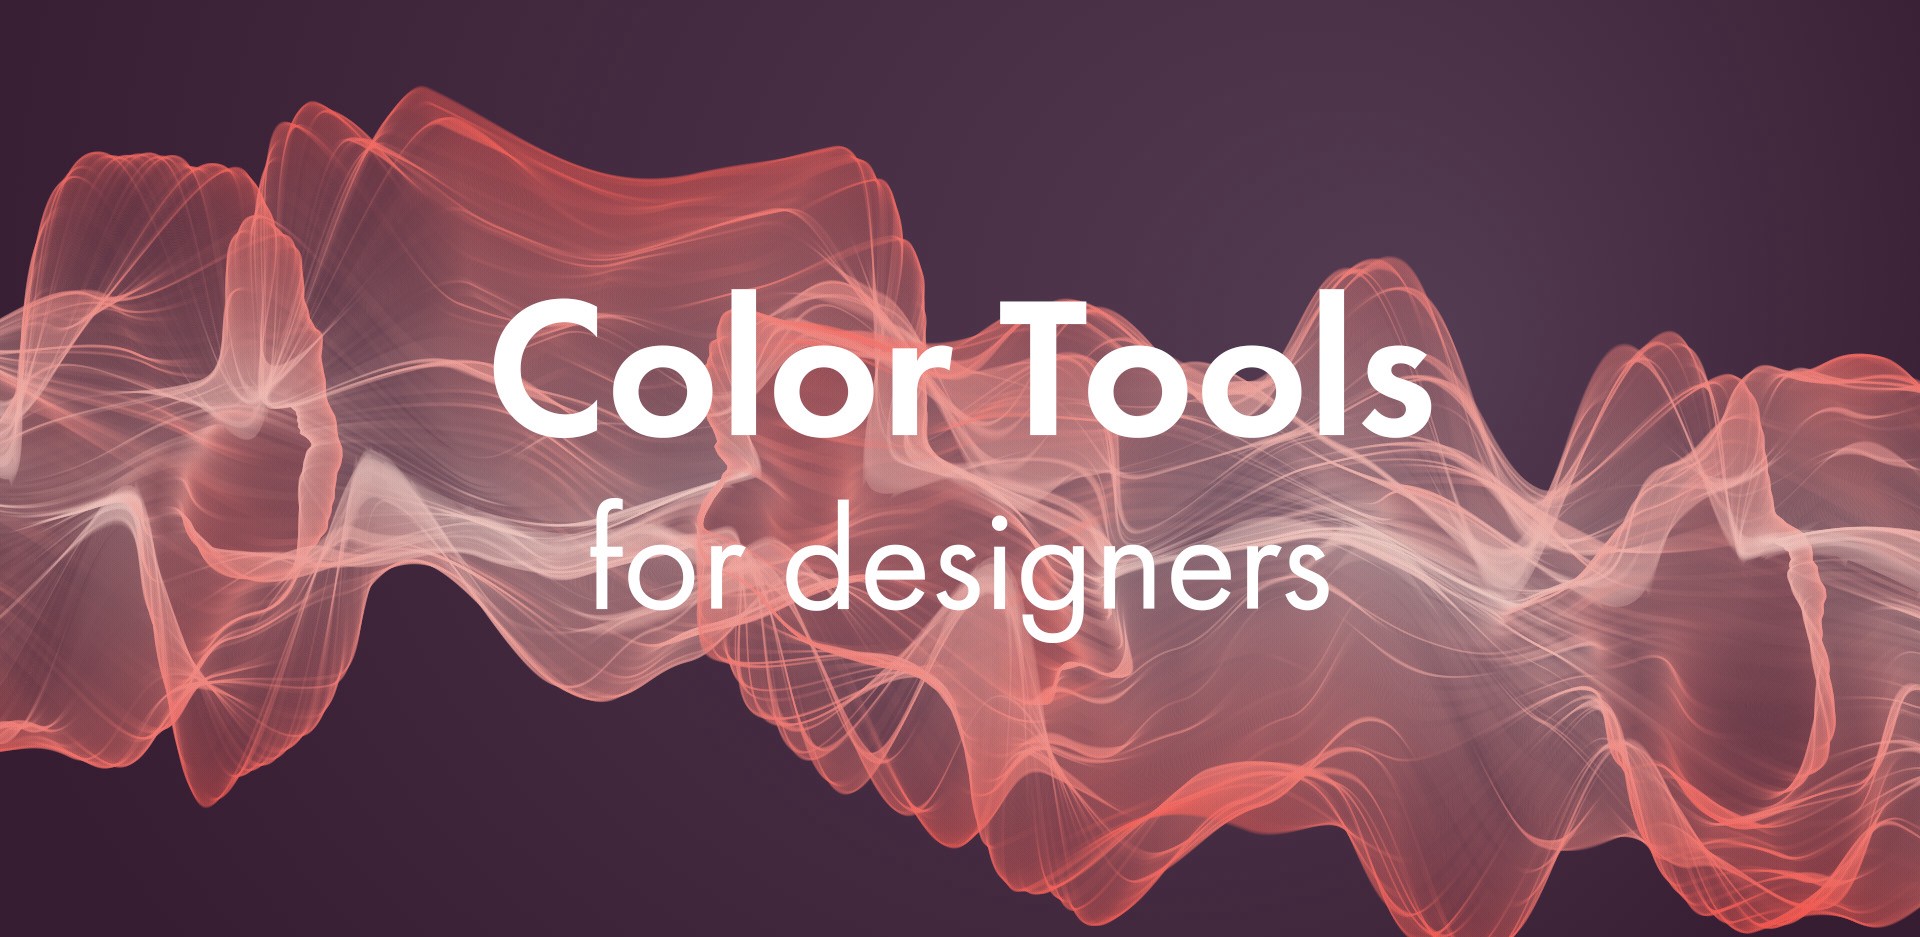 10 useful color tools for designers